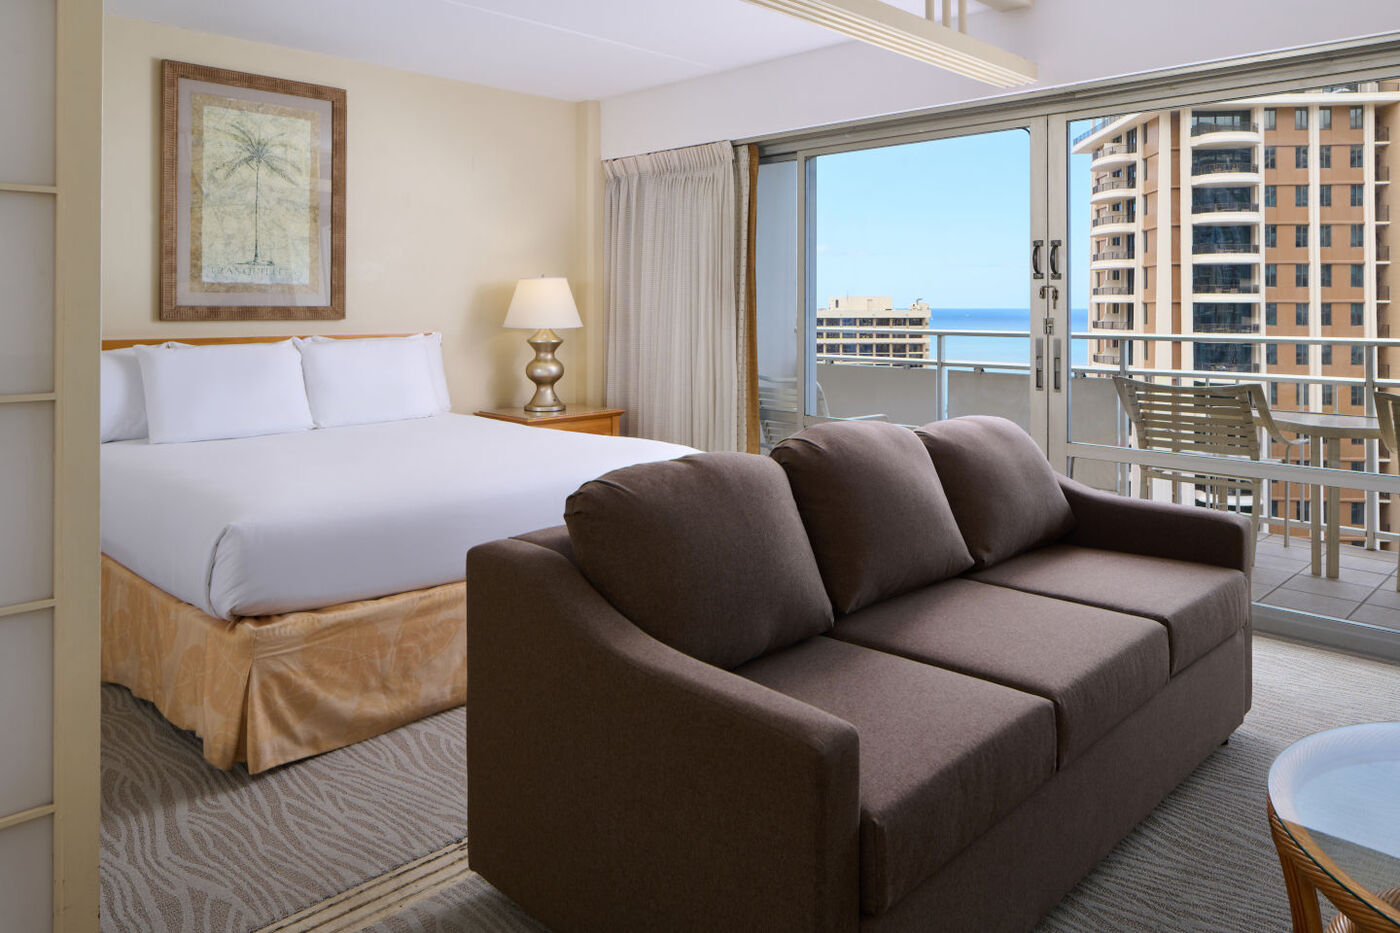 Ocean View Jr Suite with a bed and a private balcony with a beautiful views of the beach / ocean 